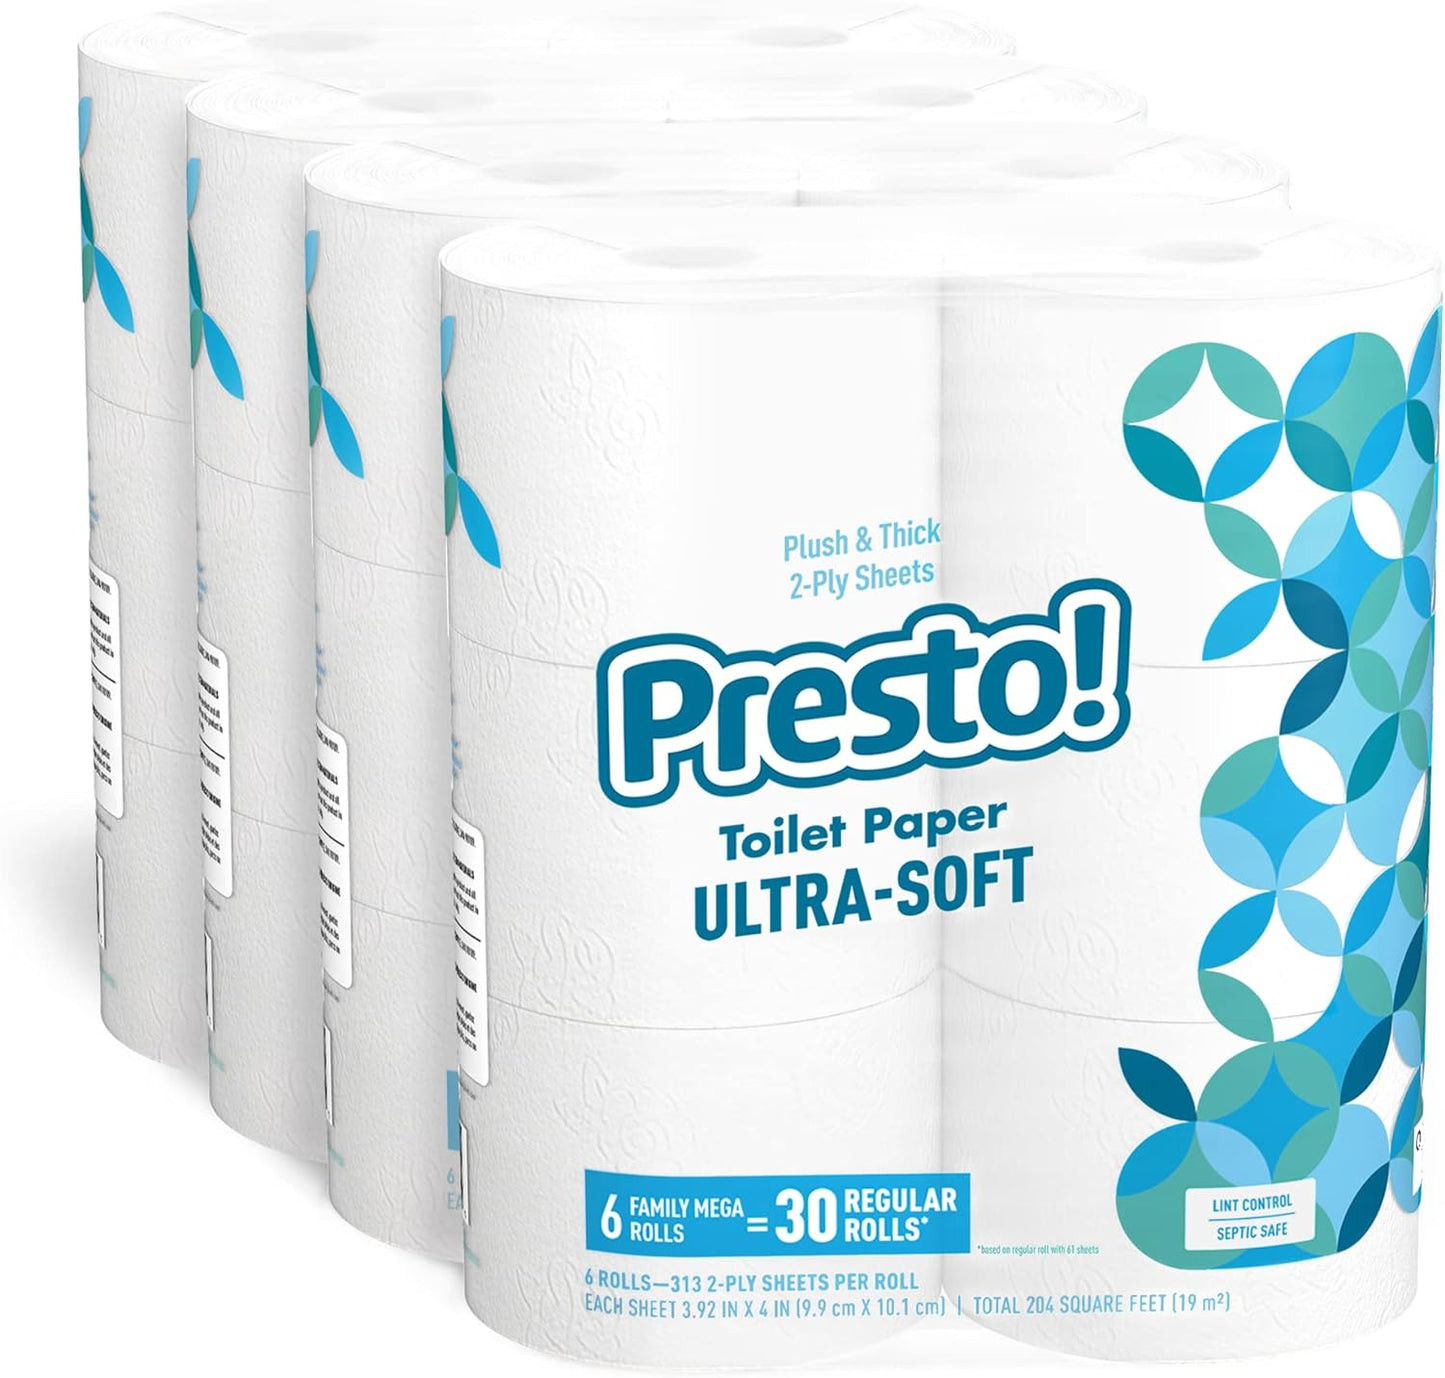 Uniites™, Amazon Brand - Presto! 2-Ply Toilet Paper, Ultra-Soft, Unscented, 24 Rolls (4 Packs of 6), Equivalent to 120 regular rolls, $25.91